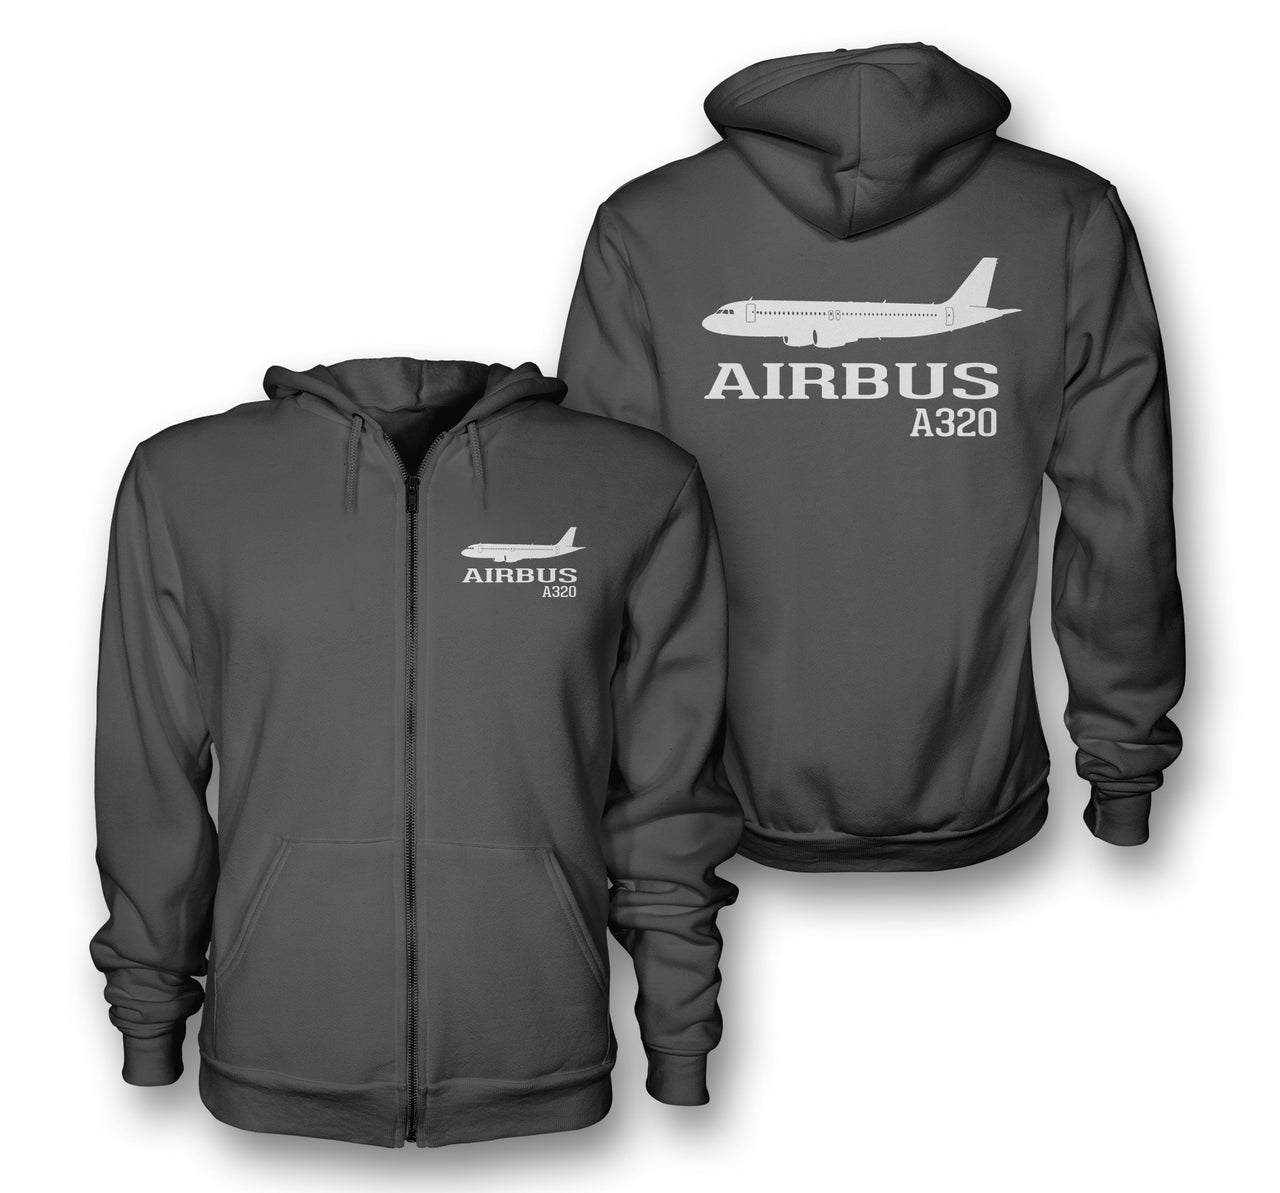 Airbus A320 Printed & Designed Zipped Hoodies